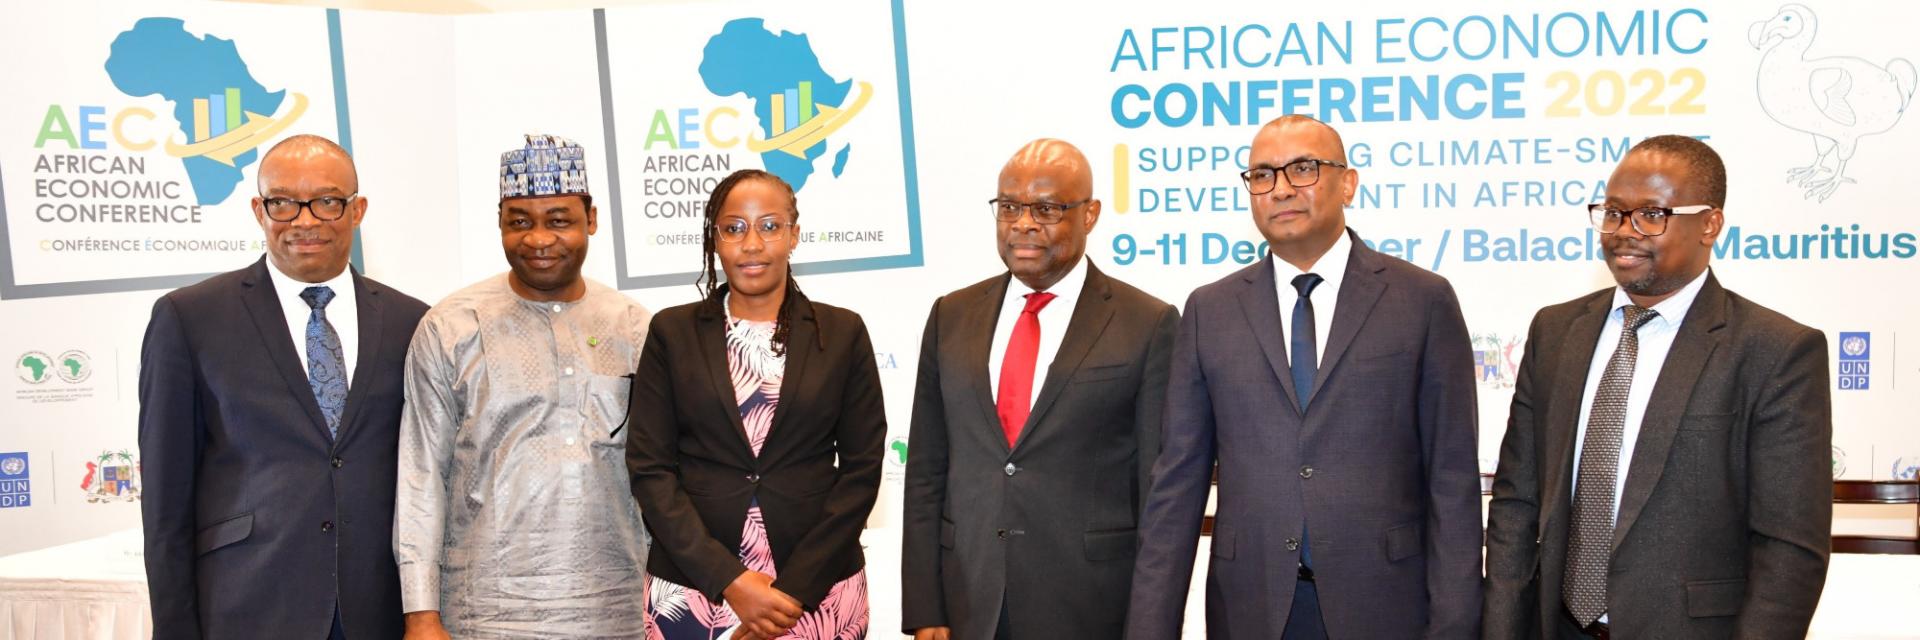 Mauritius: We are ready to host 2022 African Economic Conference - Finance Minister Padayachy